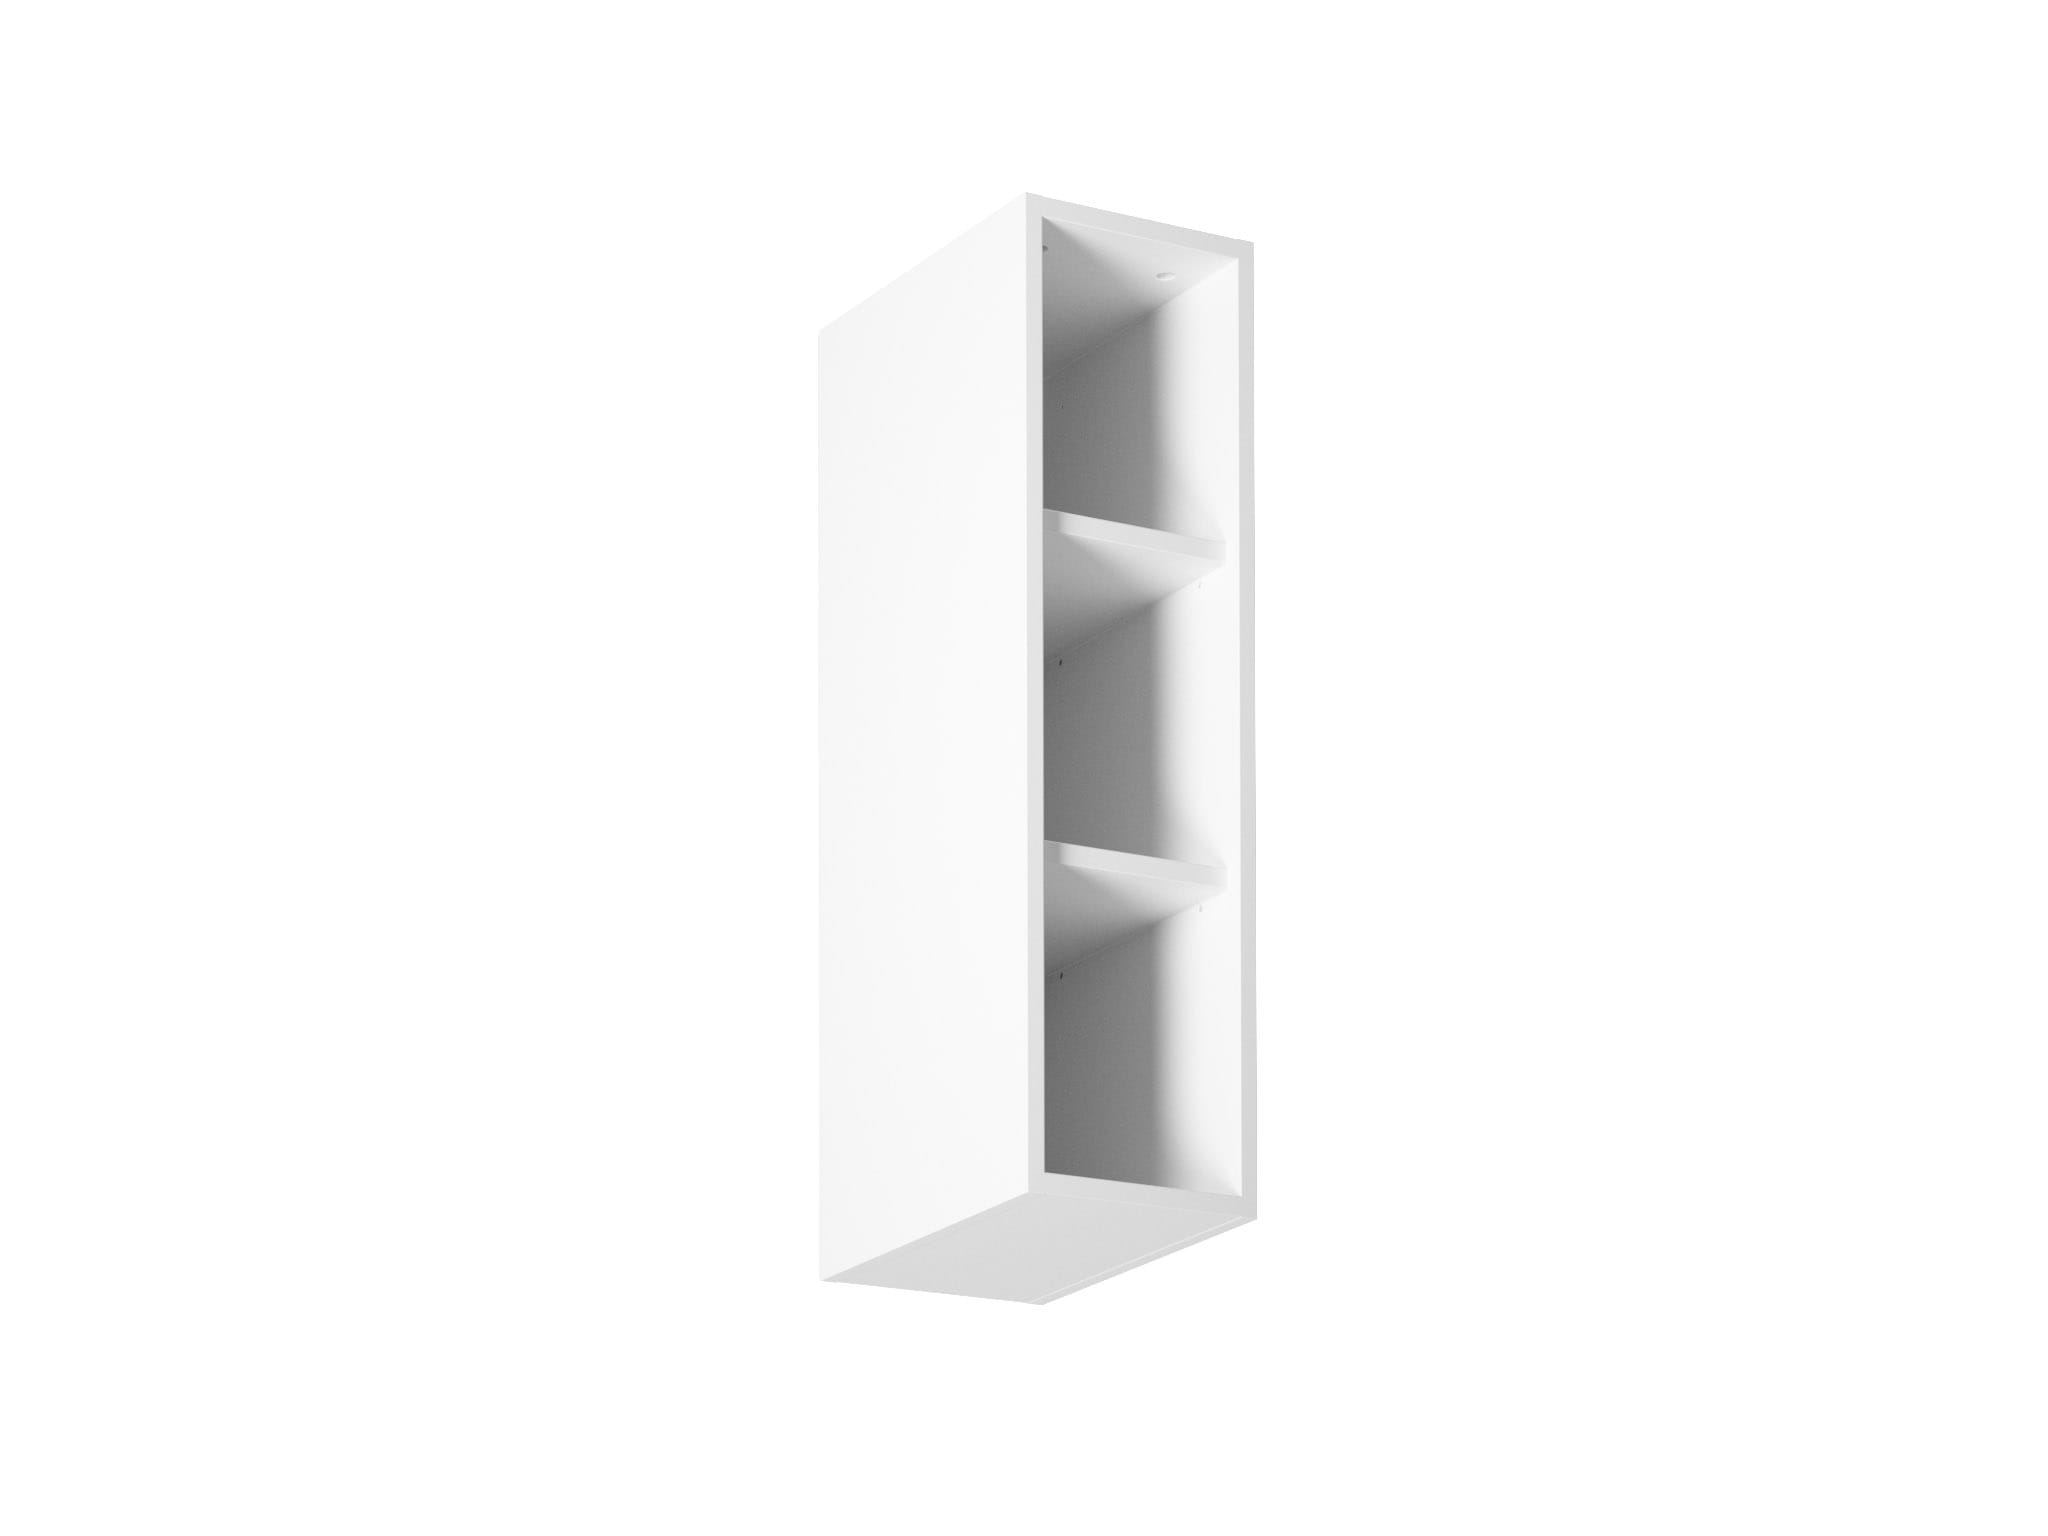 KITCHEN WALL UNIT WITH THREE SHELVES IN MODERN LOOK IN WHITE FOR A KITCHEN LINE SET W200